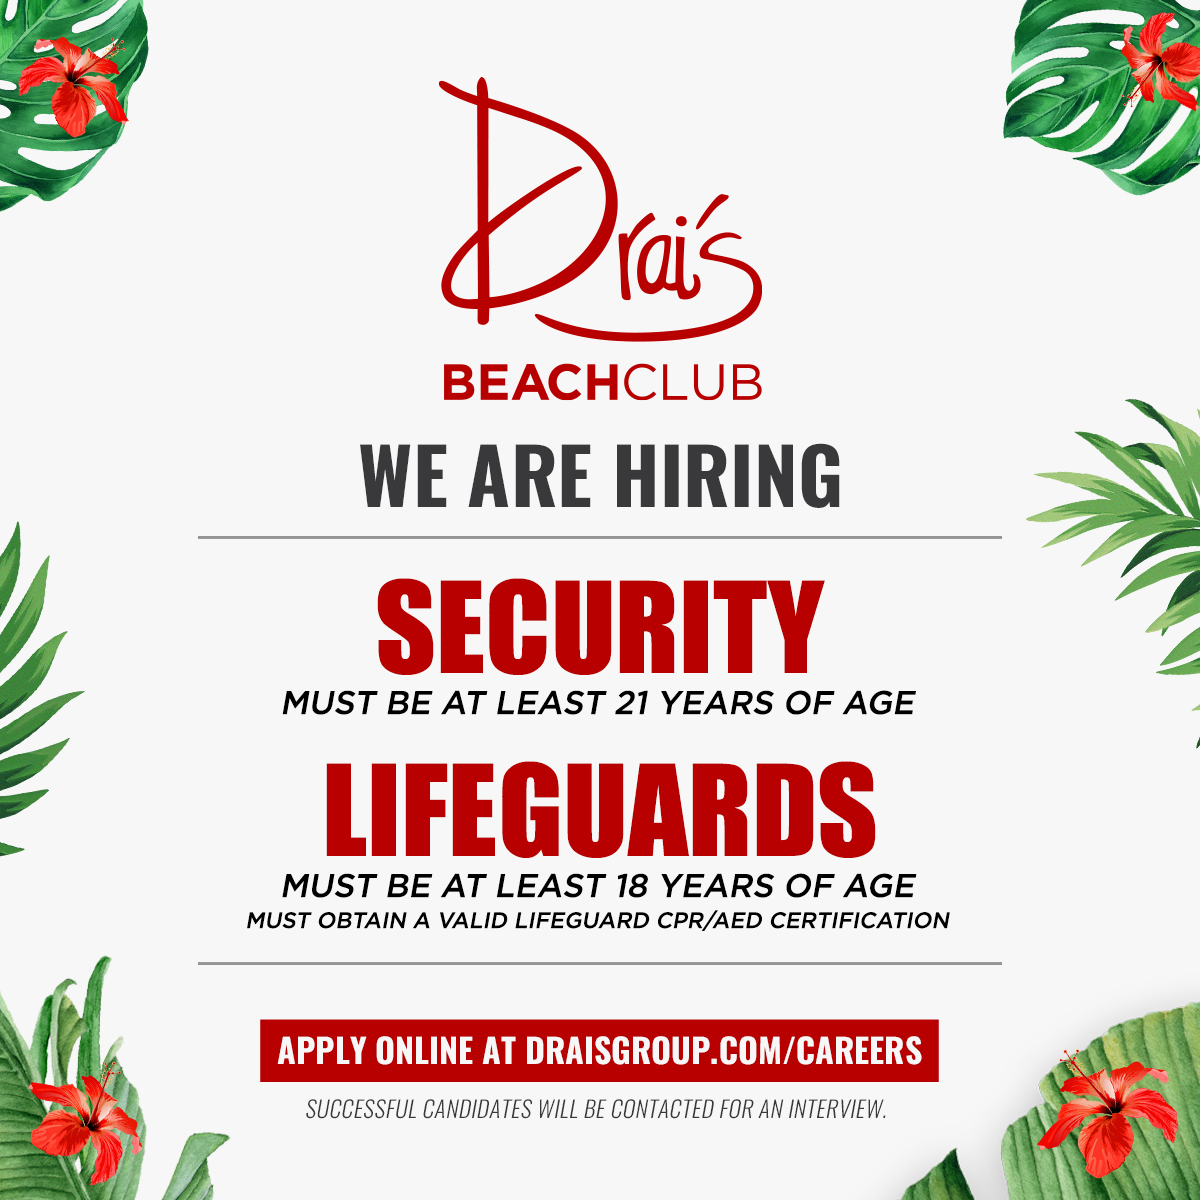 We are now hiring for security and lifeguards! Apply at draisgroup.com/careers ☀️🔥 #OnlyatDrais